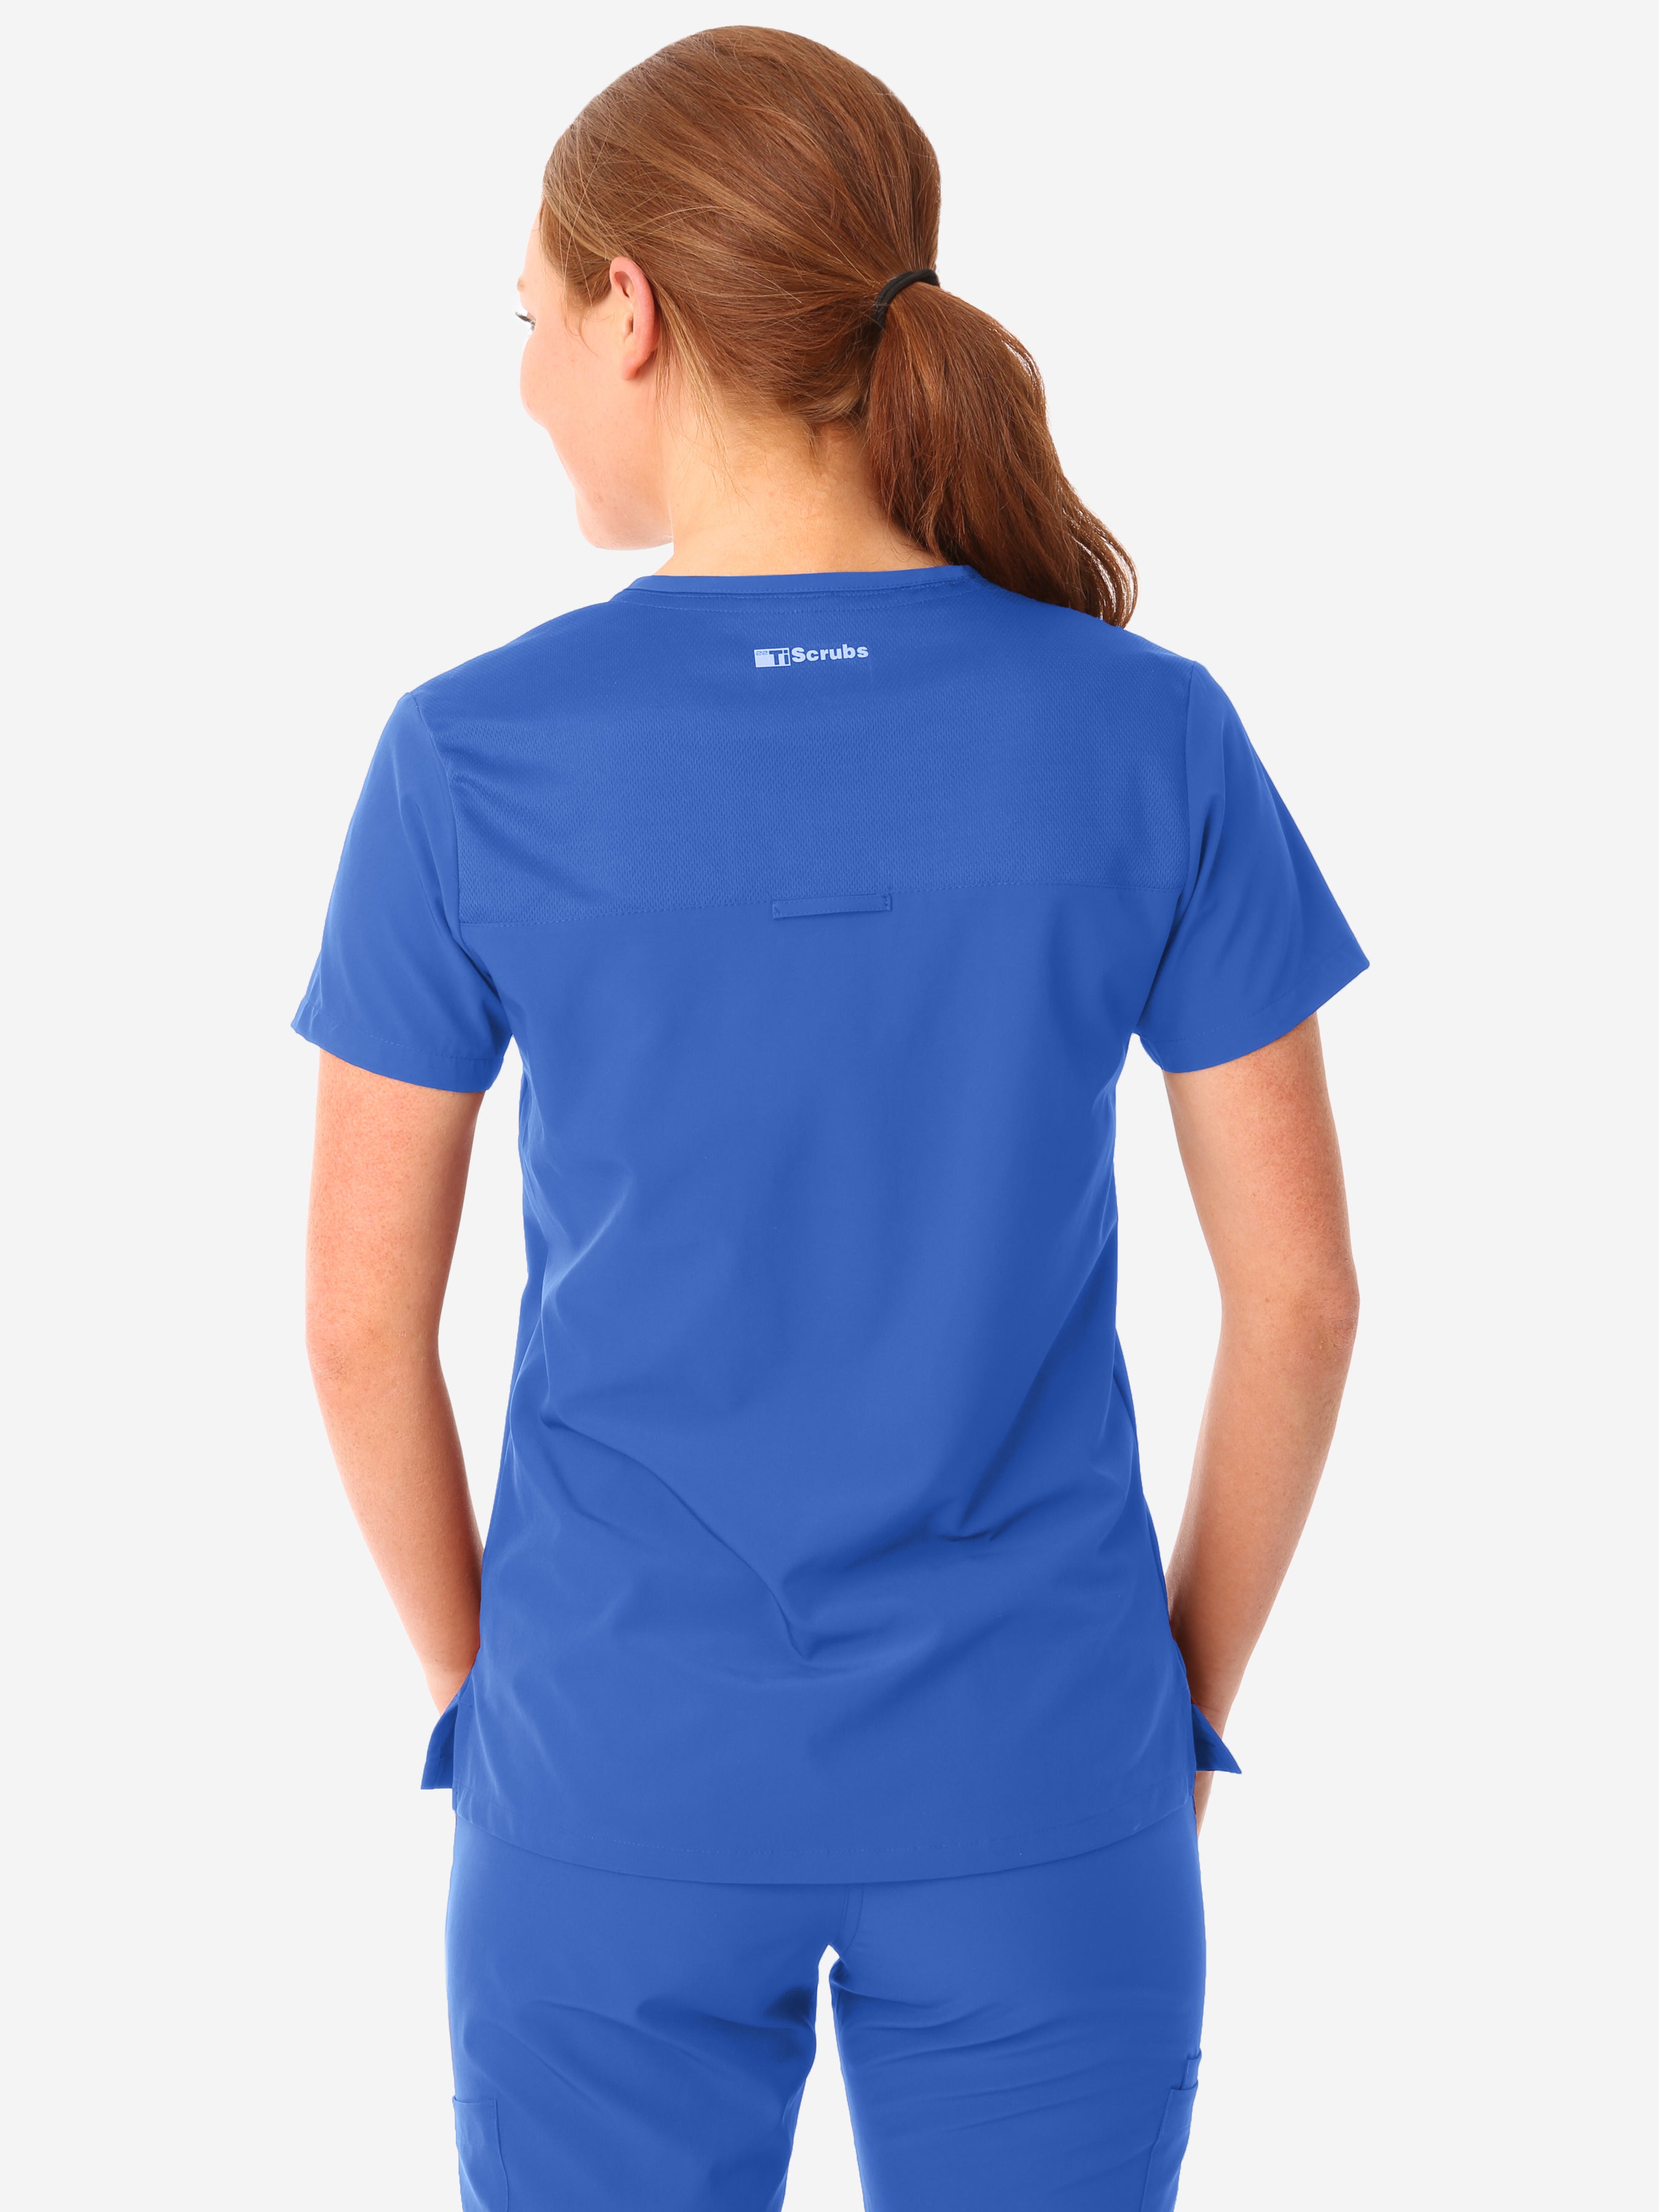 TiScrubs Women&#39;s Stretch Royal Blue One-Pocket Scrub Top Untucked Back View Top Only